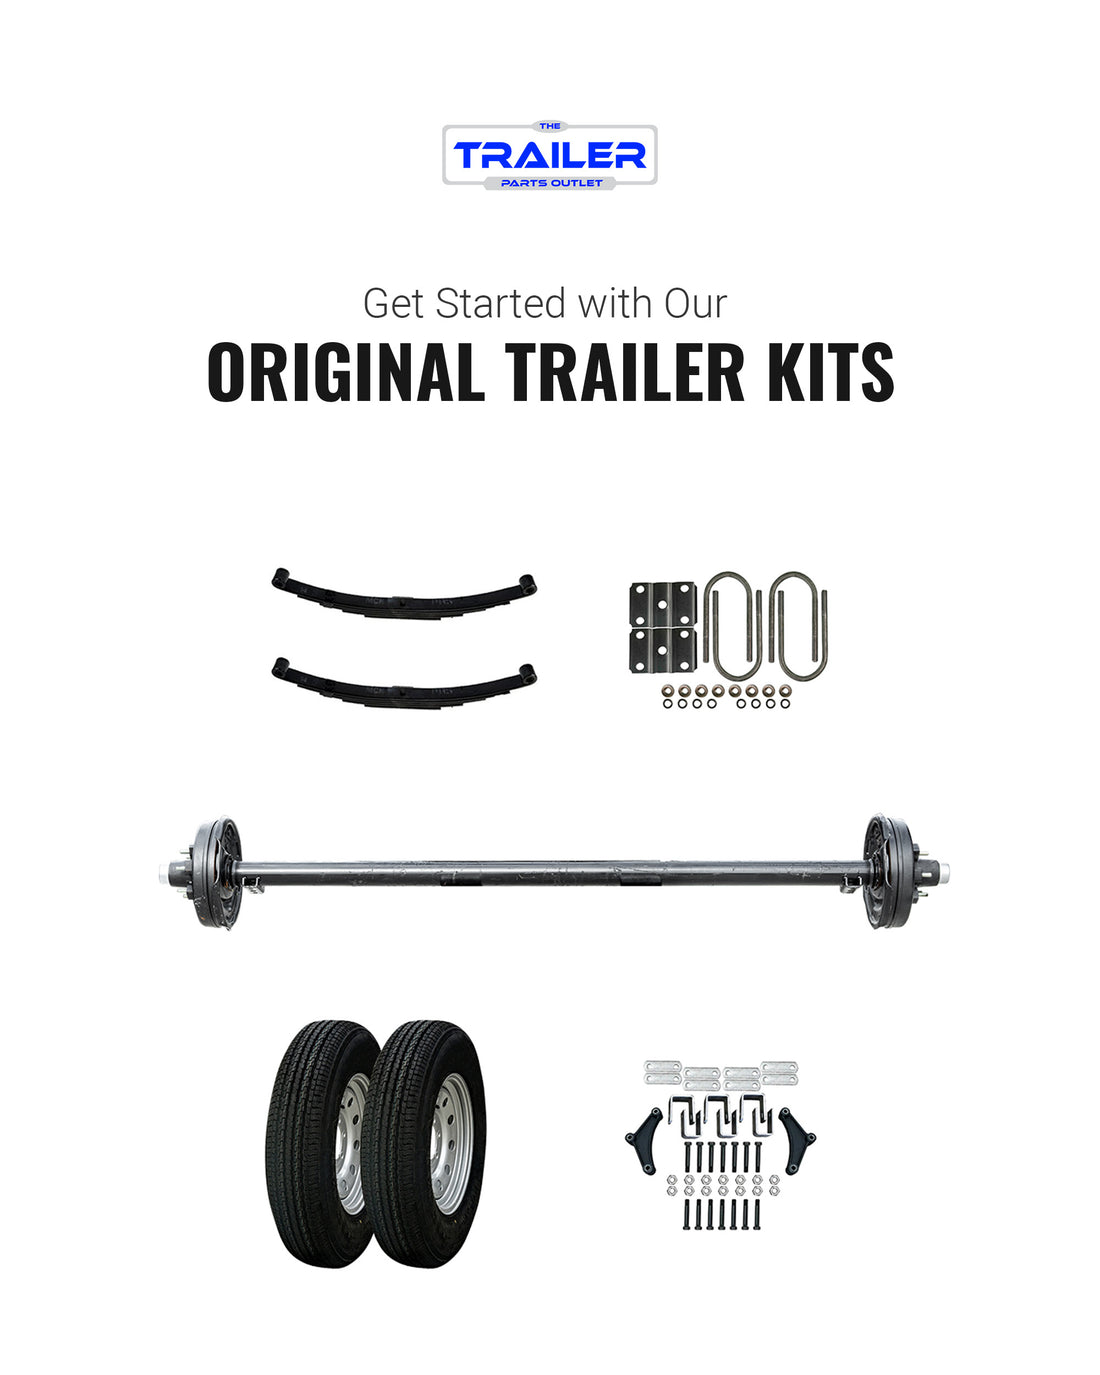 TK Trailer Kits | Everything you need to build your trailer | Trailer Axles, Trailer Tire and Wheel Assemblies, Trailer Suspension Springs, U-bolt and hanger kits | The Trailer Parts outlet